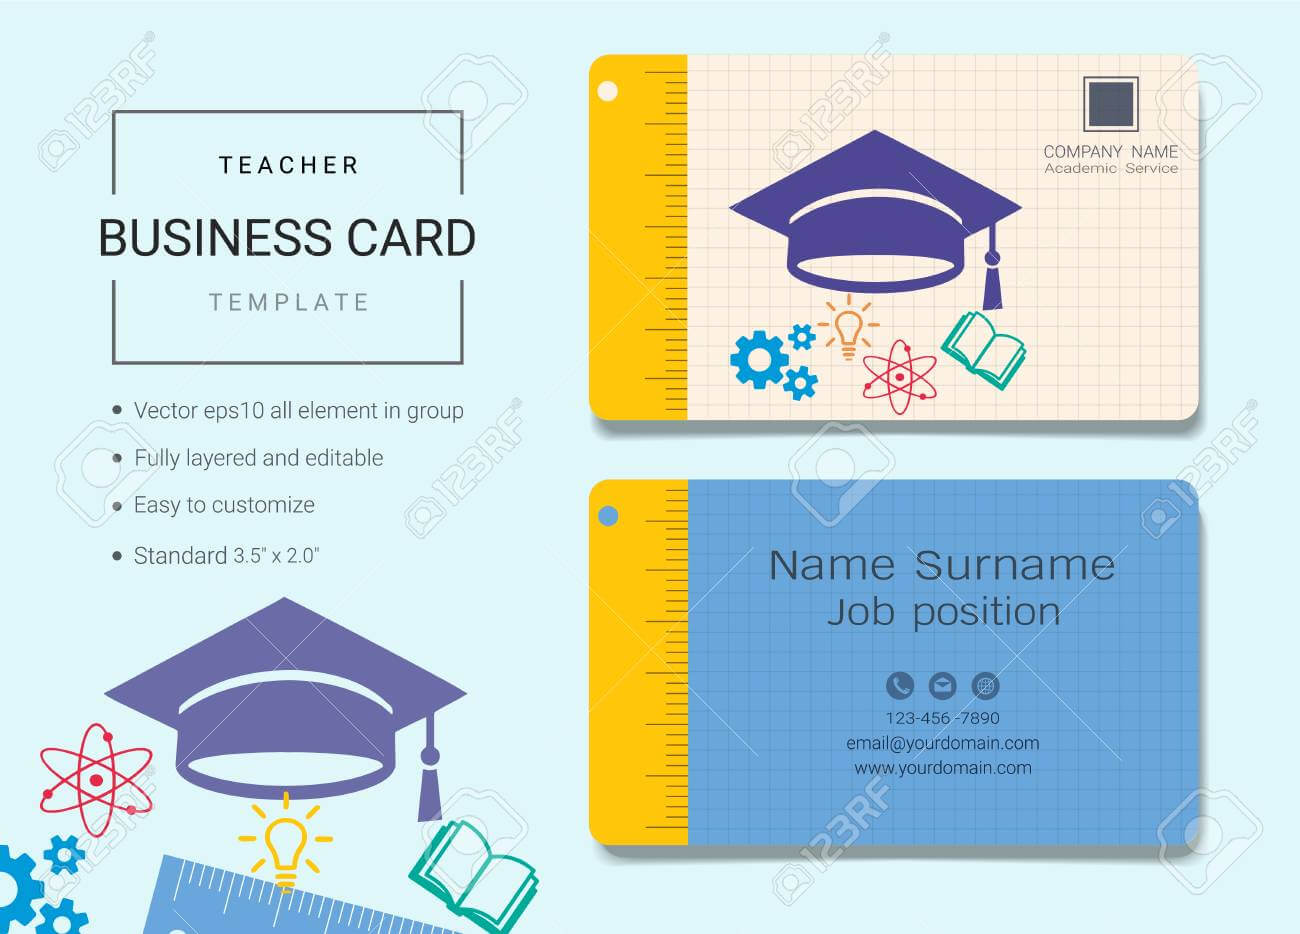 Teacher Business Cards Templates Free Intended For Business Cards For Teachers Templates Free